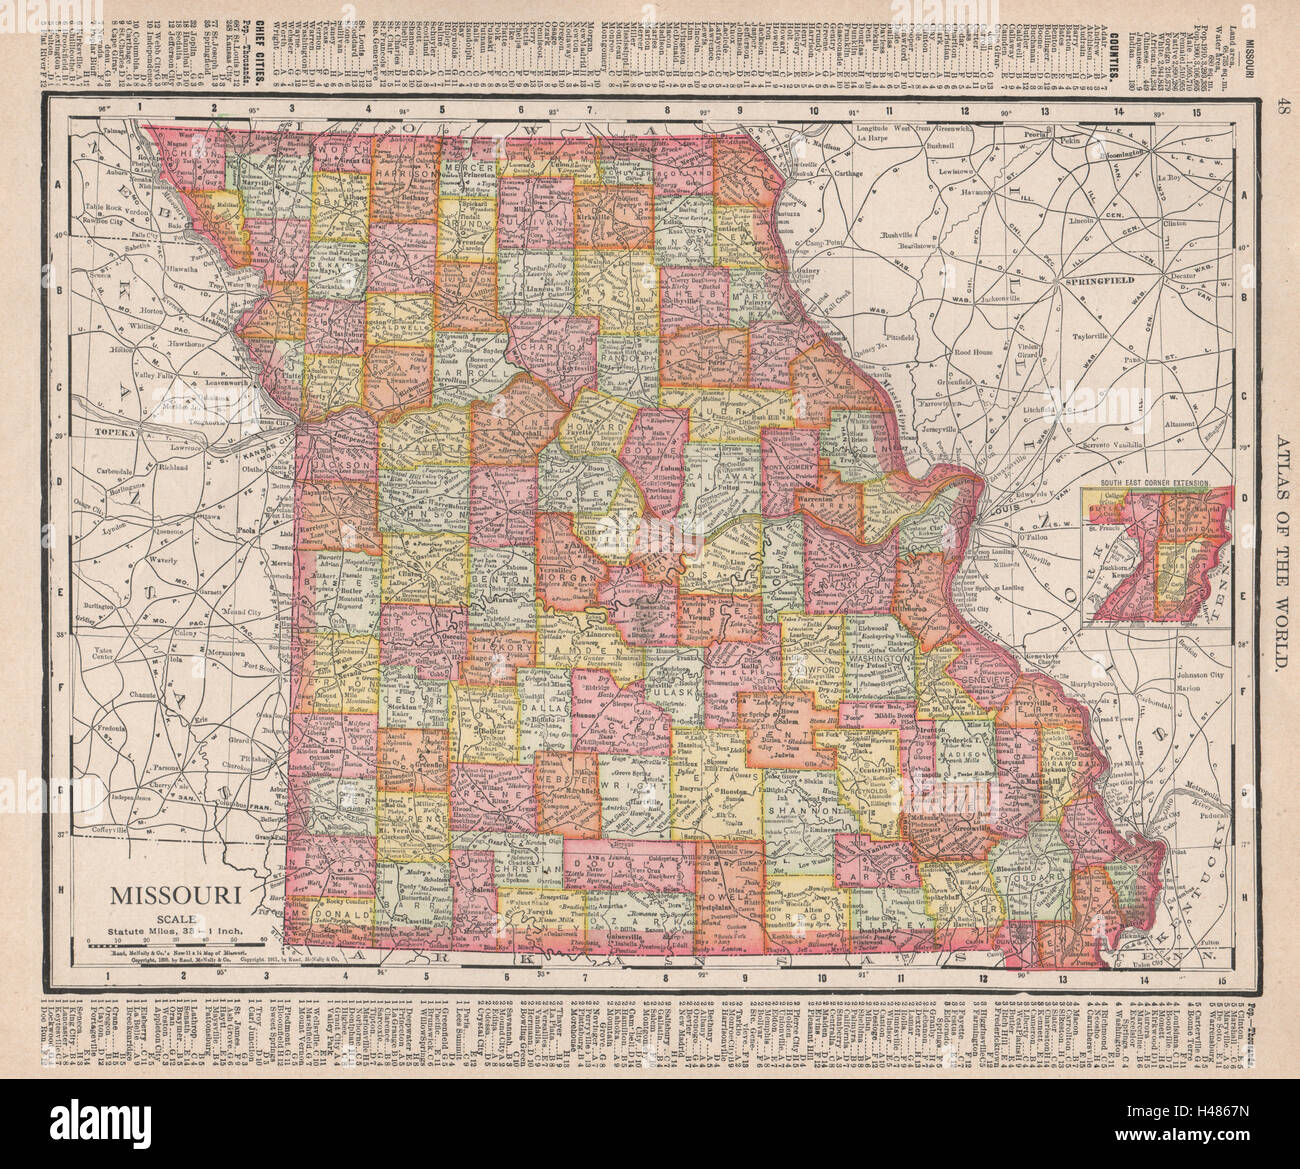 Missouri state map showing counties. RAND MCNALLY 1912 old antique chart Stock Photo